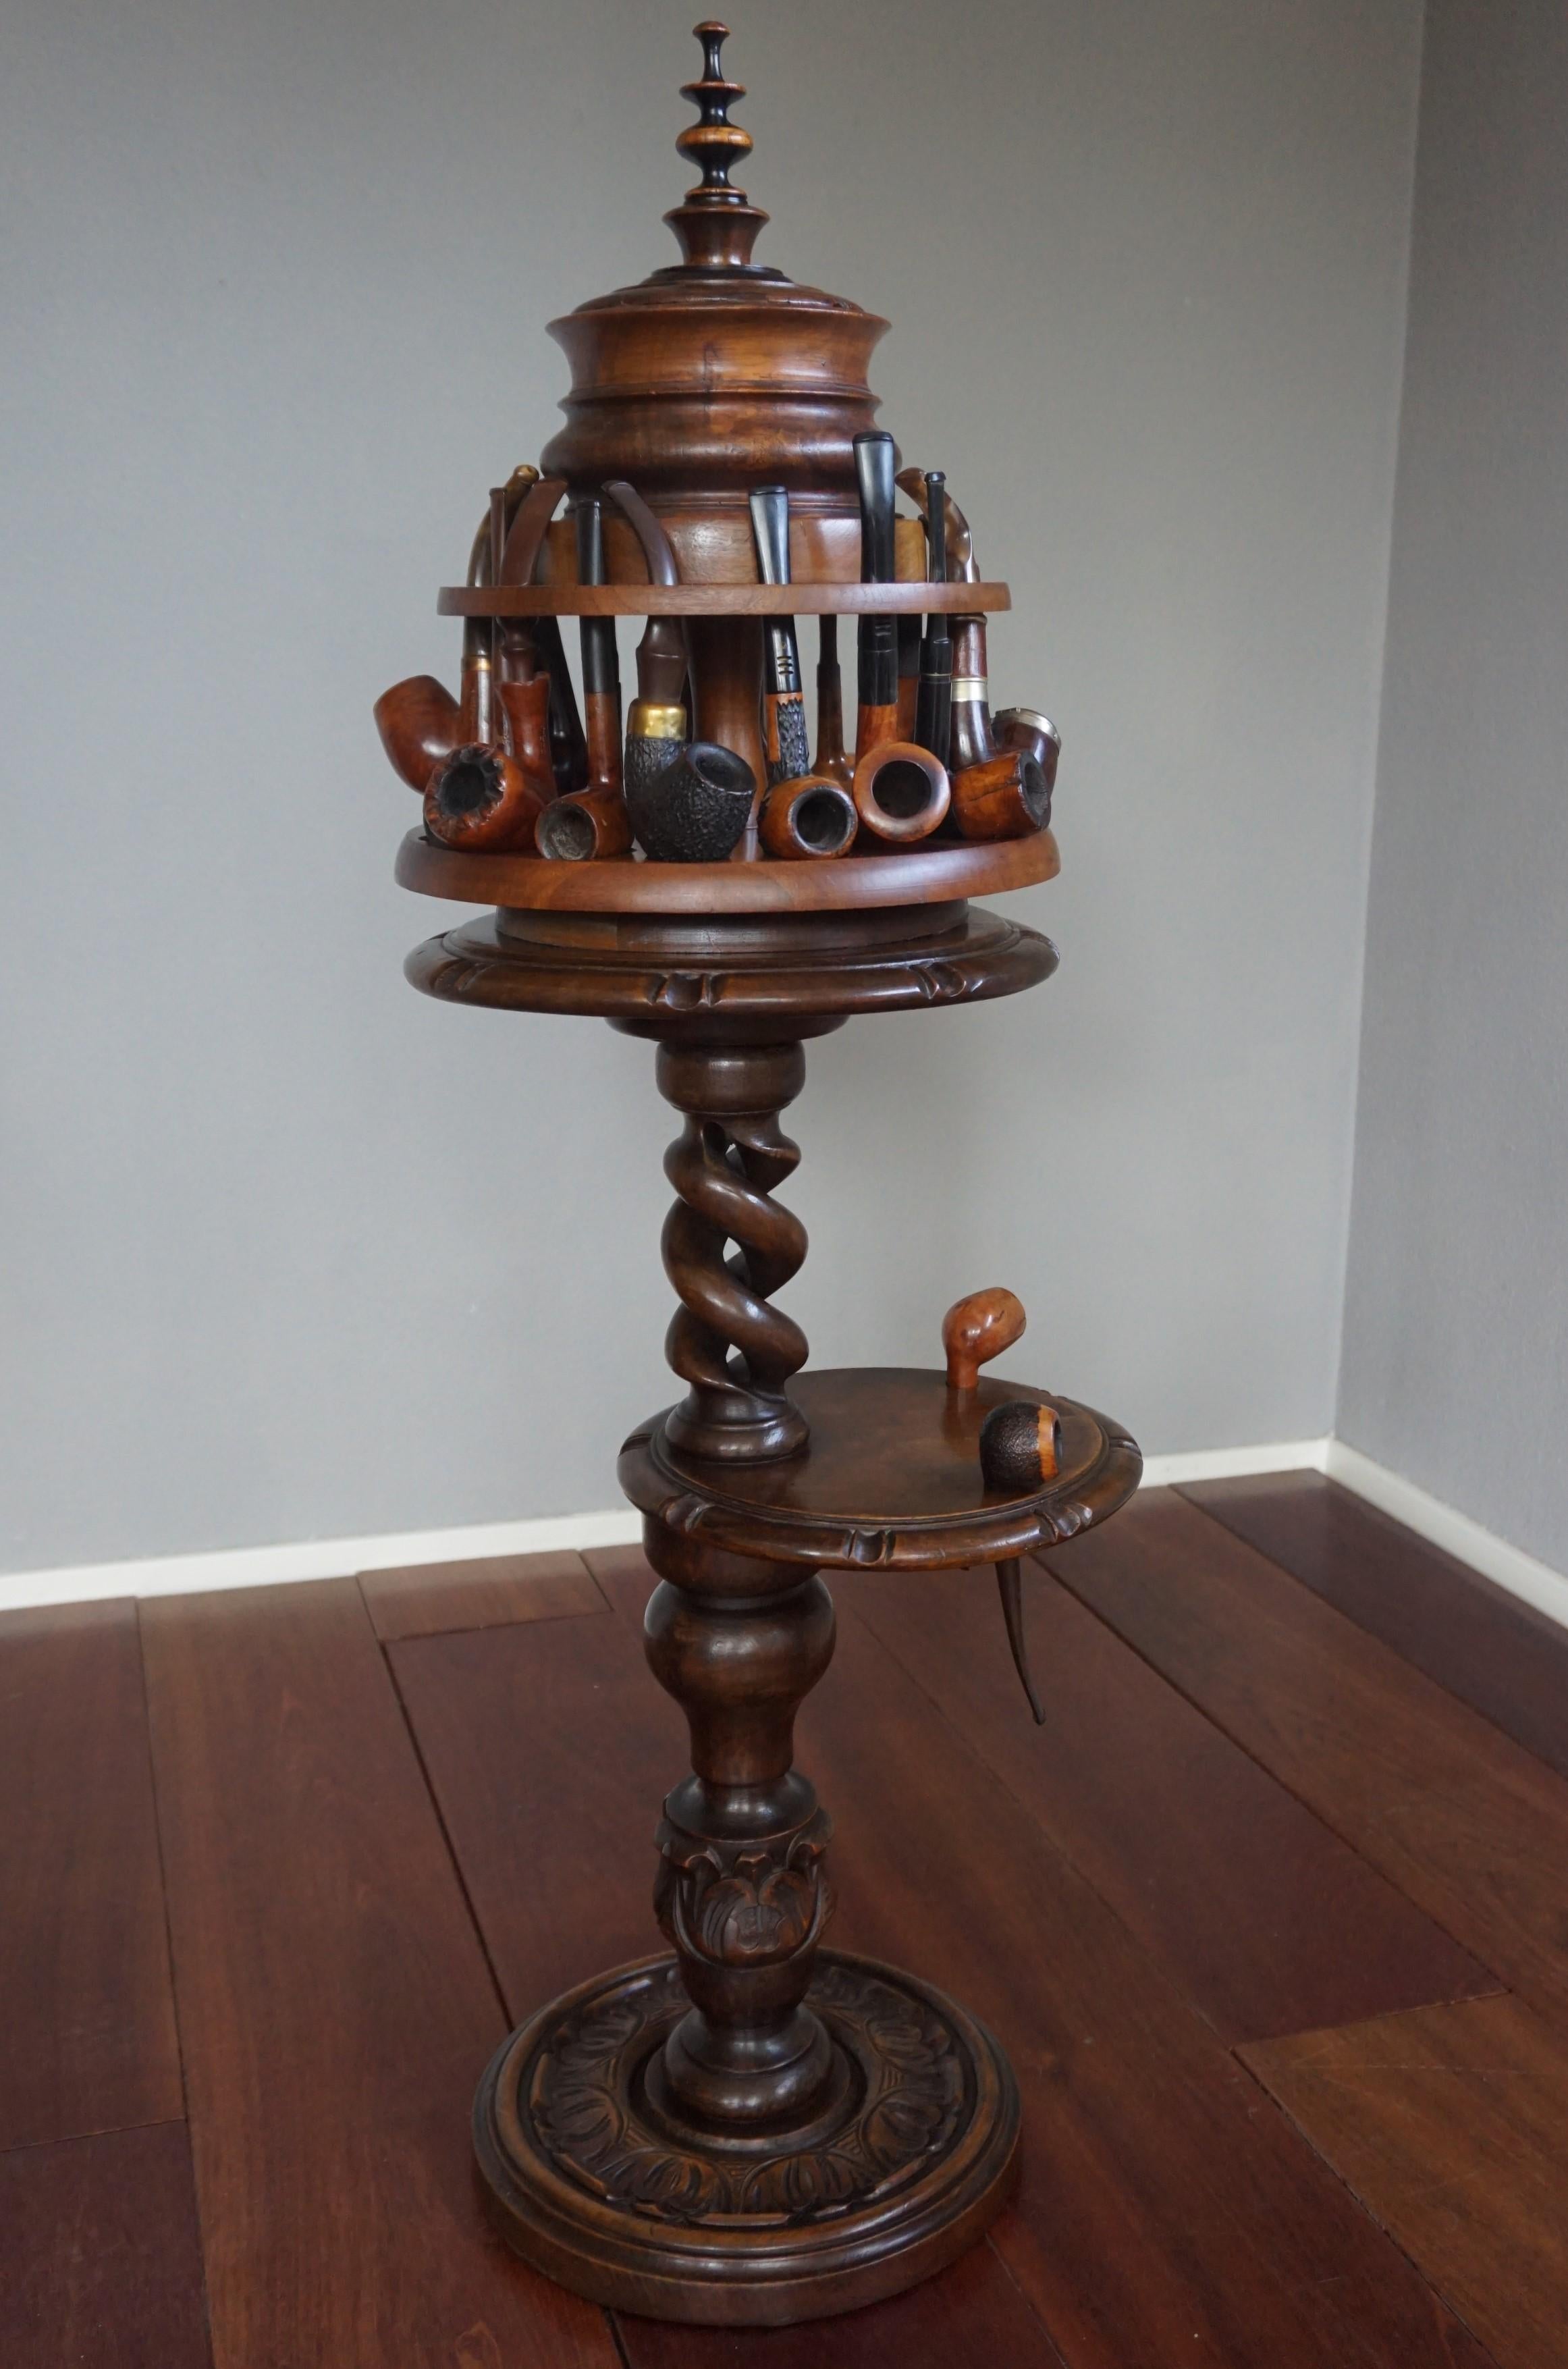 Collection of items for pipe or tobacco smokers. 

This beautiful collection for pipe smoking enthusiasts consists of 21 individual pieces in total. First of all, there is the antique wooden pipe stand with the extra tier with two holes for carrying